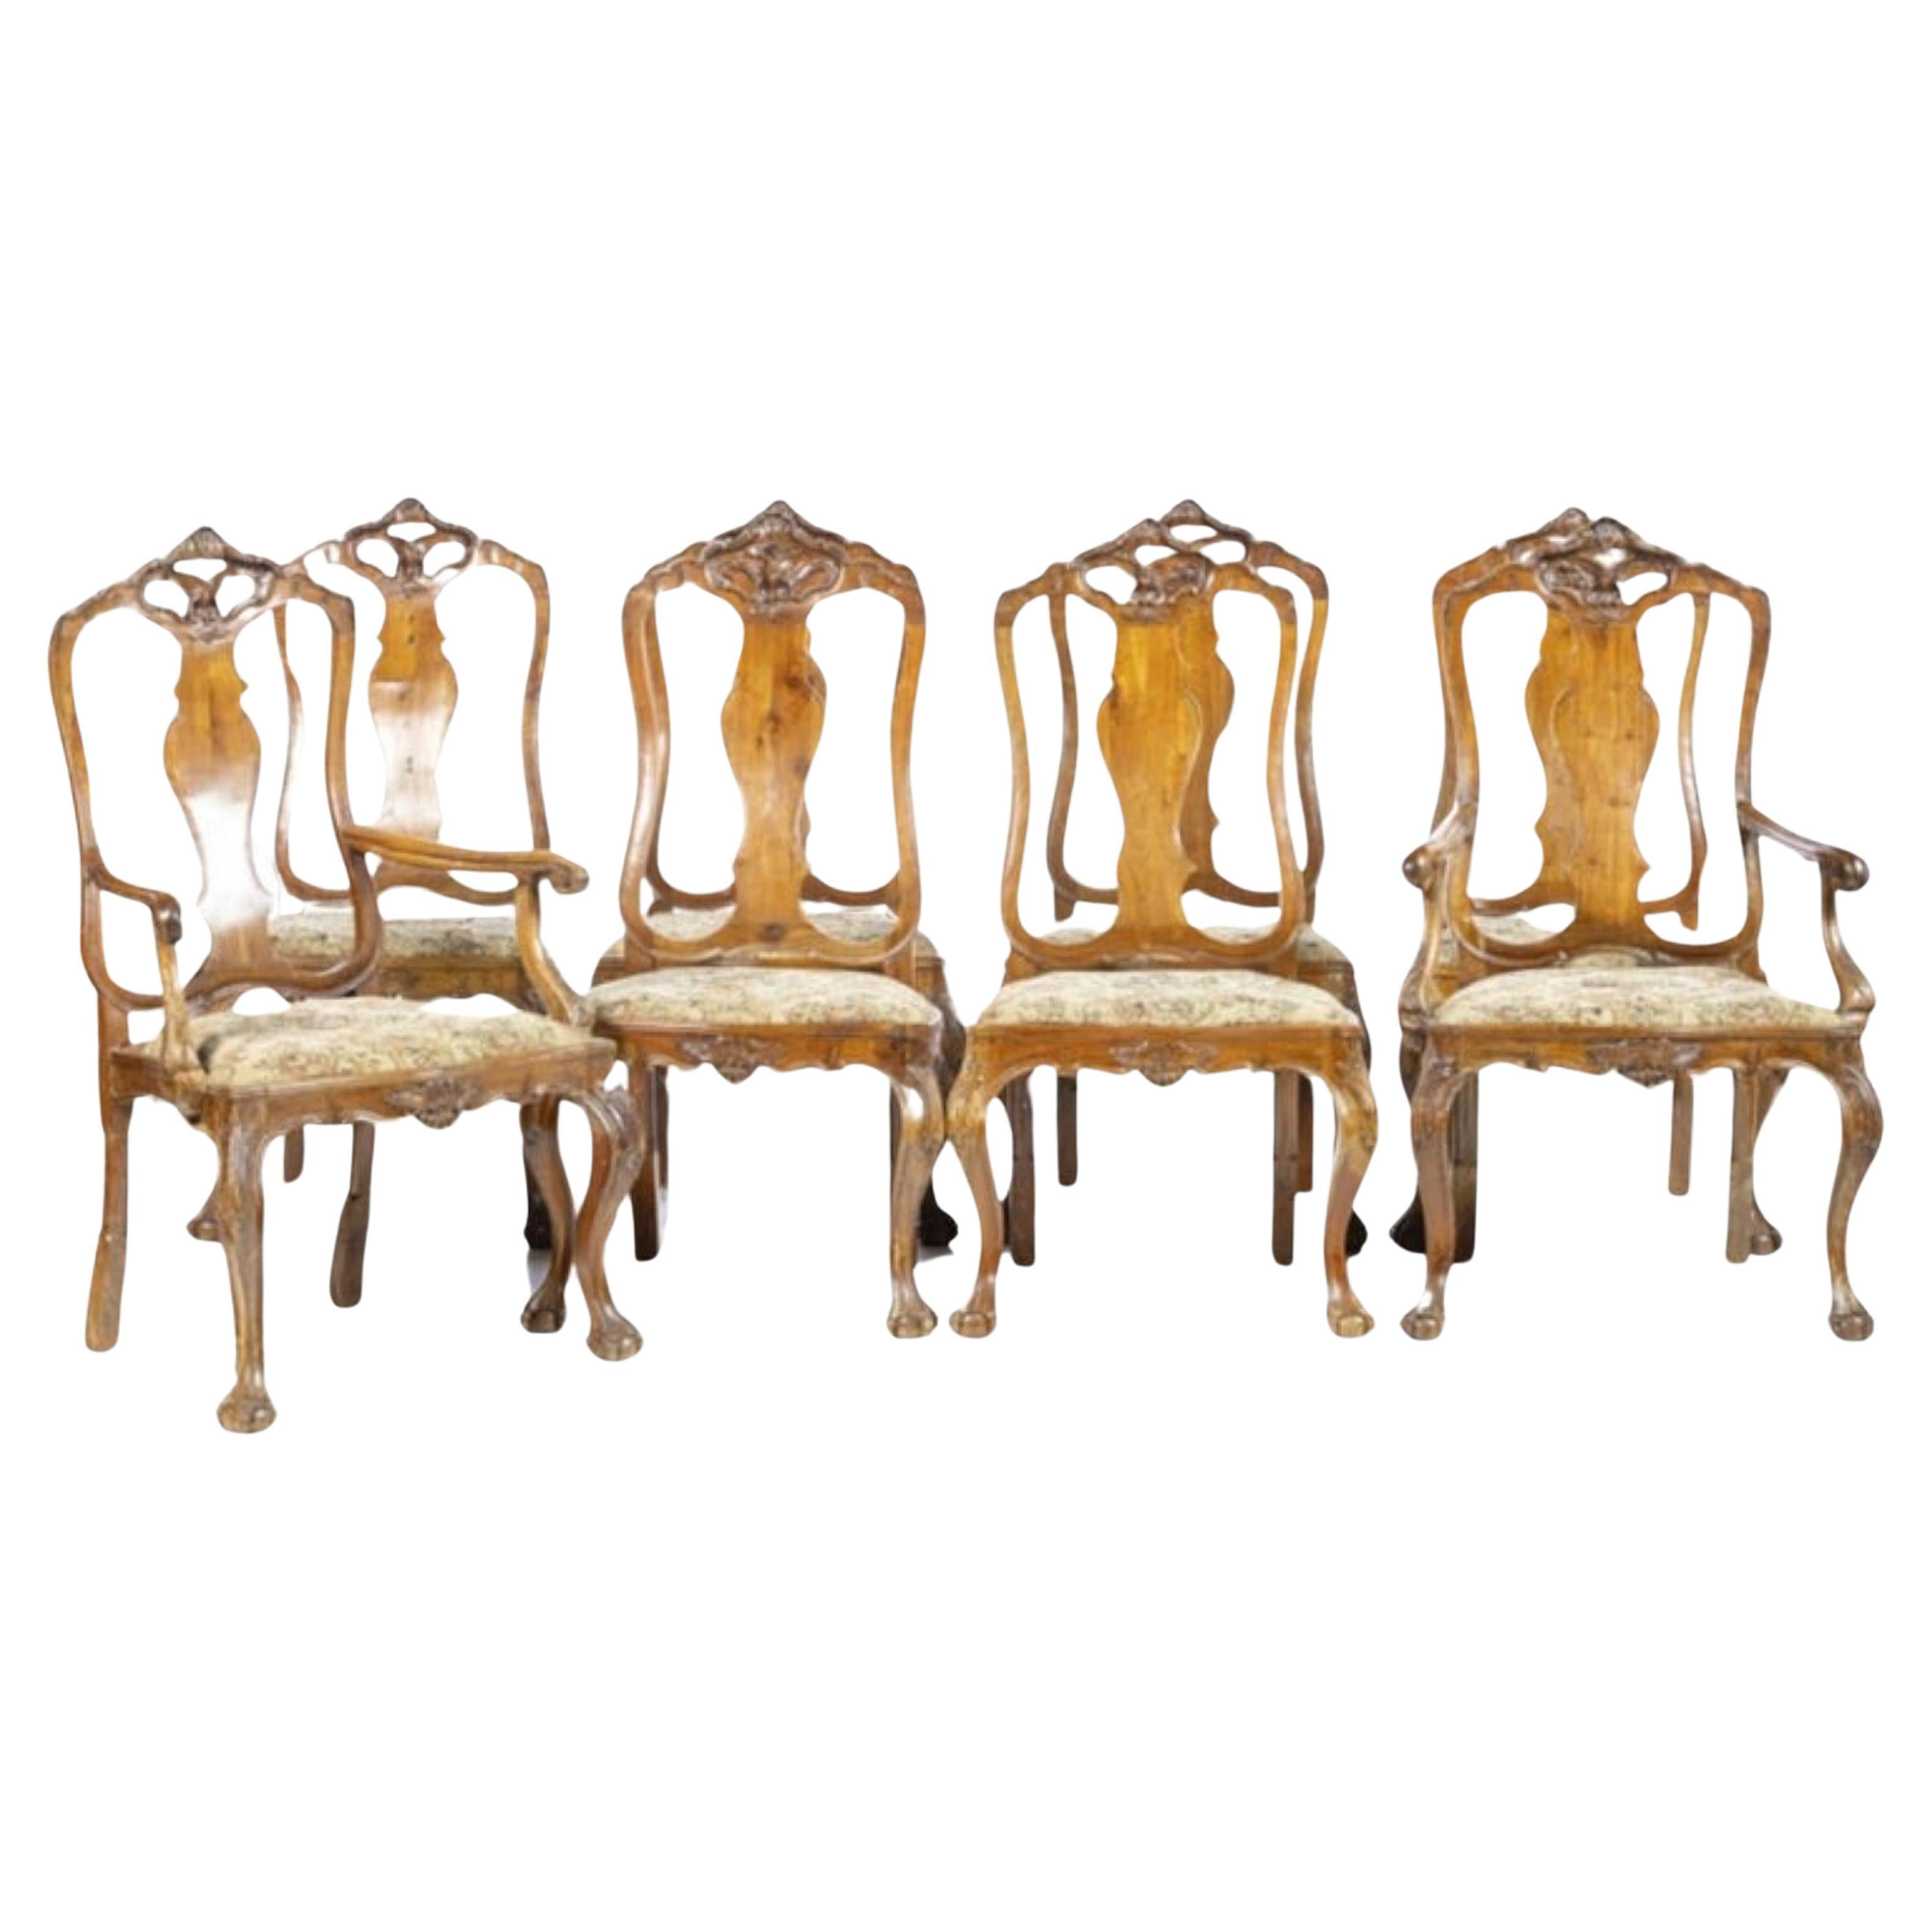 Set of Six Portuguese Chairs and Two Chairs D. João v of the 18th Century For Sale